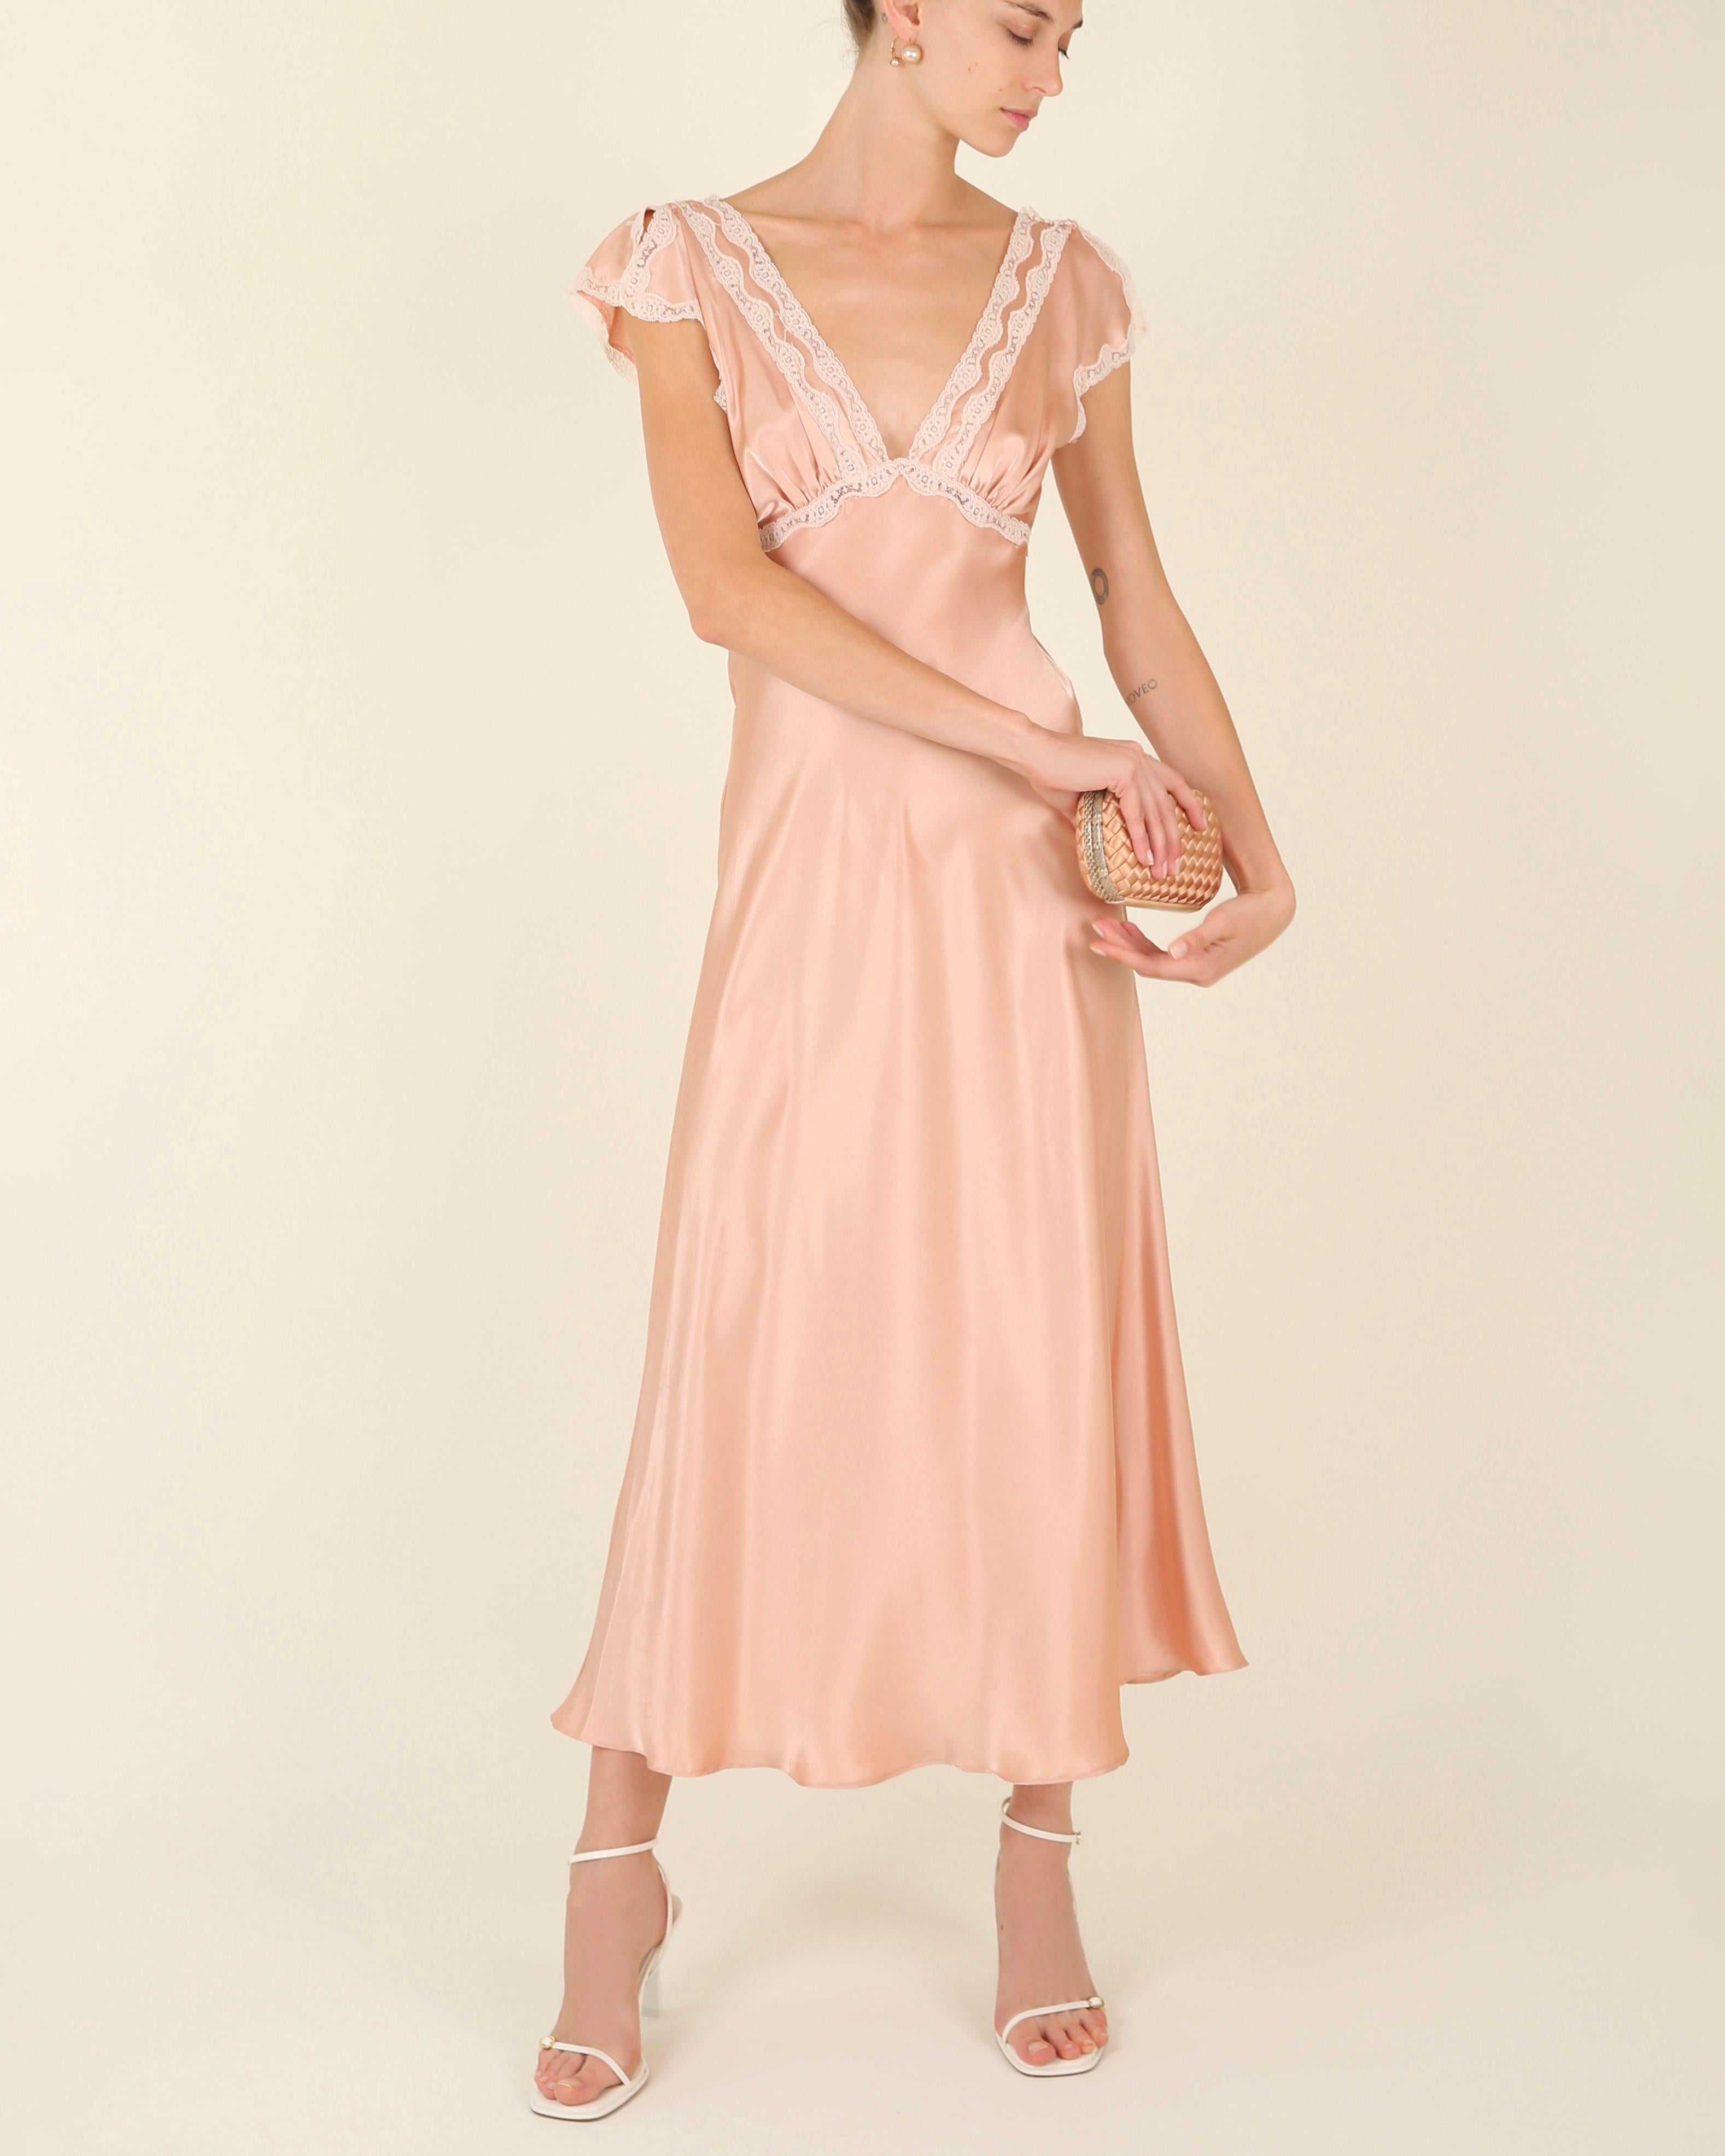 LOVE LALI Vintage

A very pretty vintage night gown in pink silk with white lace trim. Could easily be worn as a dress in an evening. Slitted flutter sleeves. A low cut V plunging neckline. Empire cut with a flowing skirt. An open low cut back. Midi